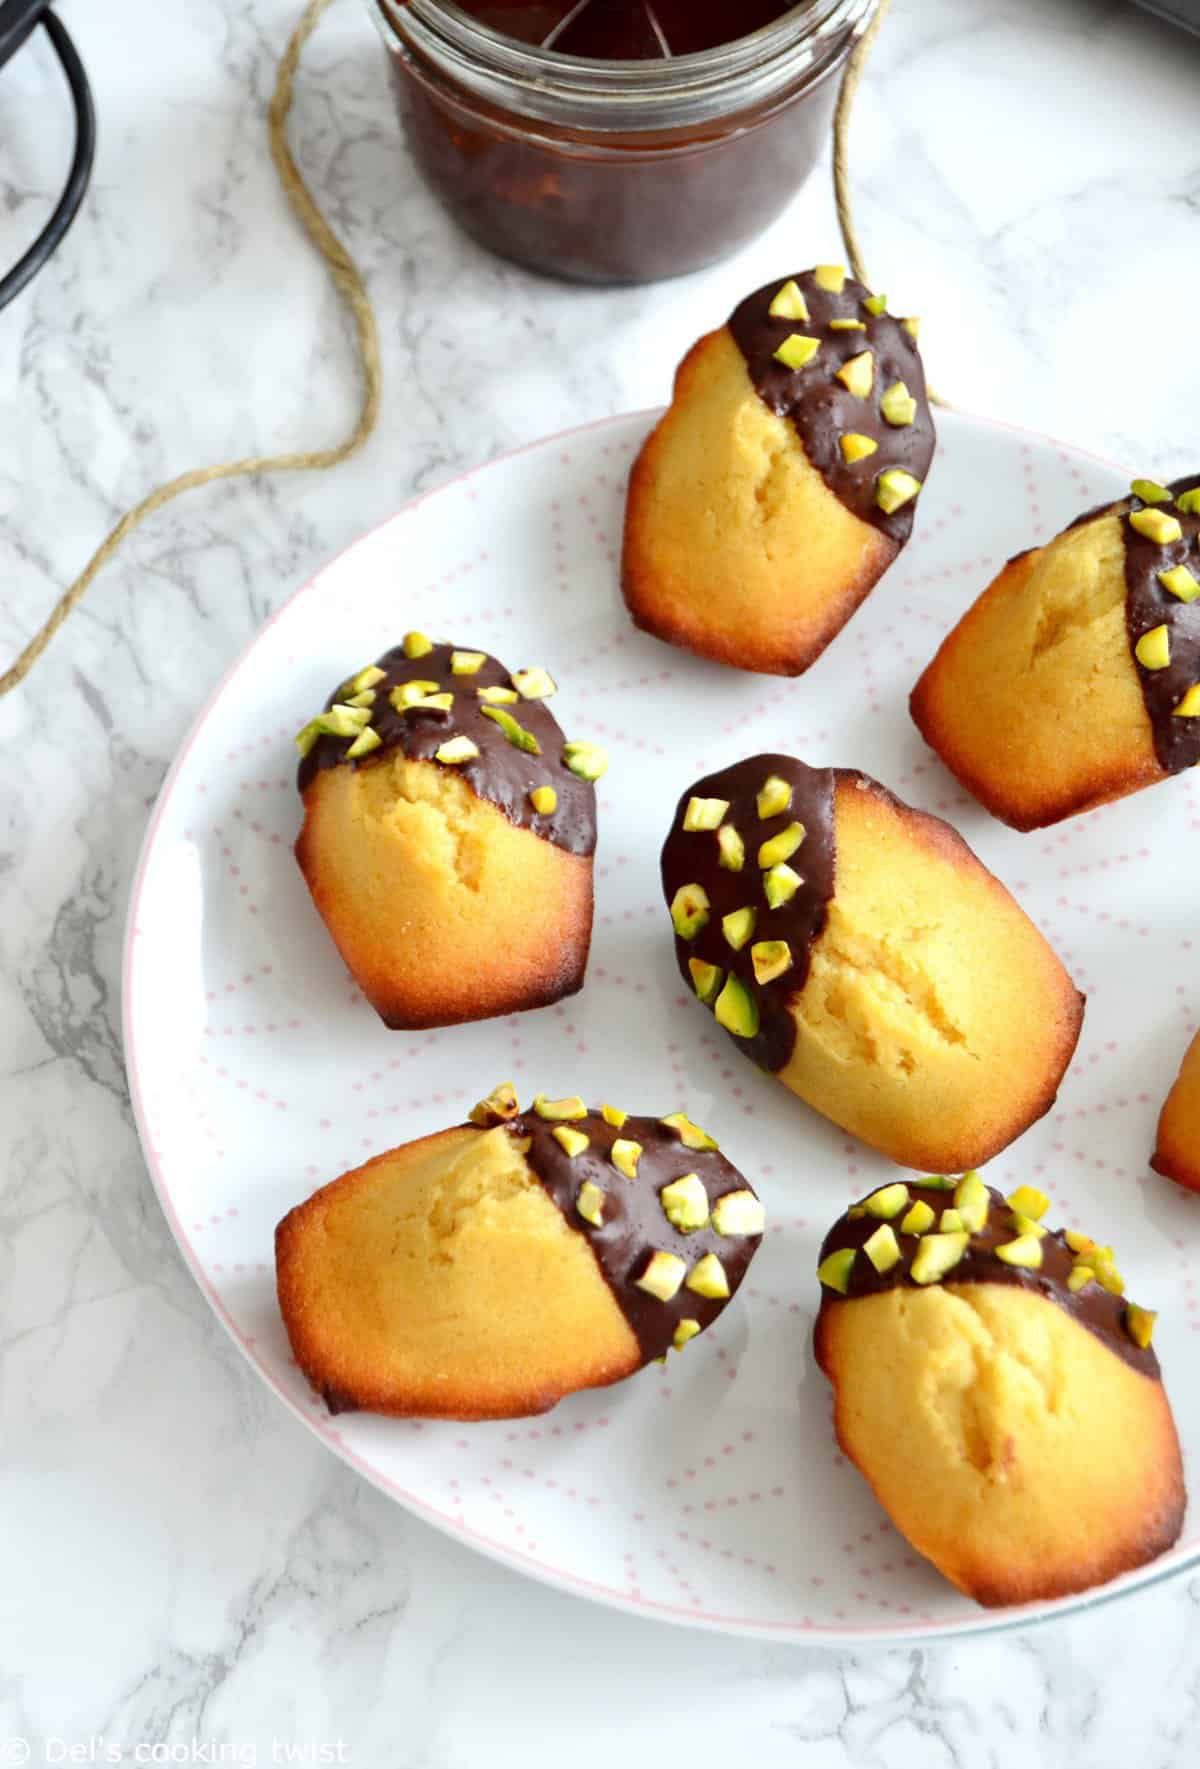 https://www.delscookingtwist.com/wp-content/uploads/2016/11/Dipped-Chocolate-Madeleines-with-Pistachios_0352.jpg